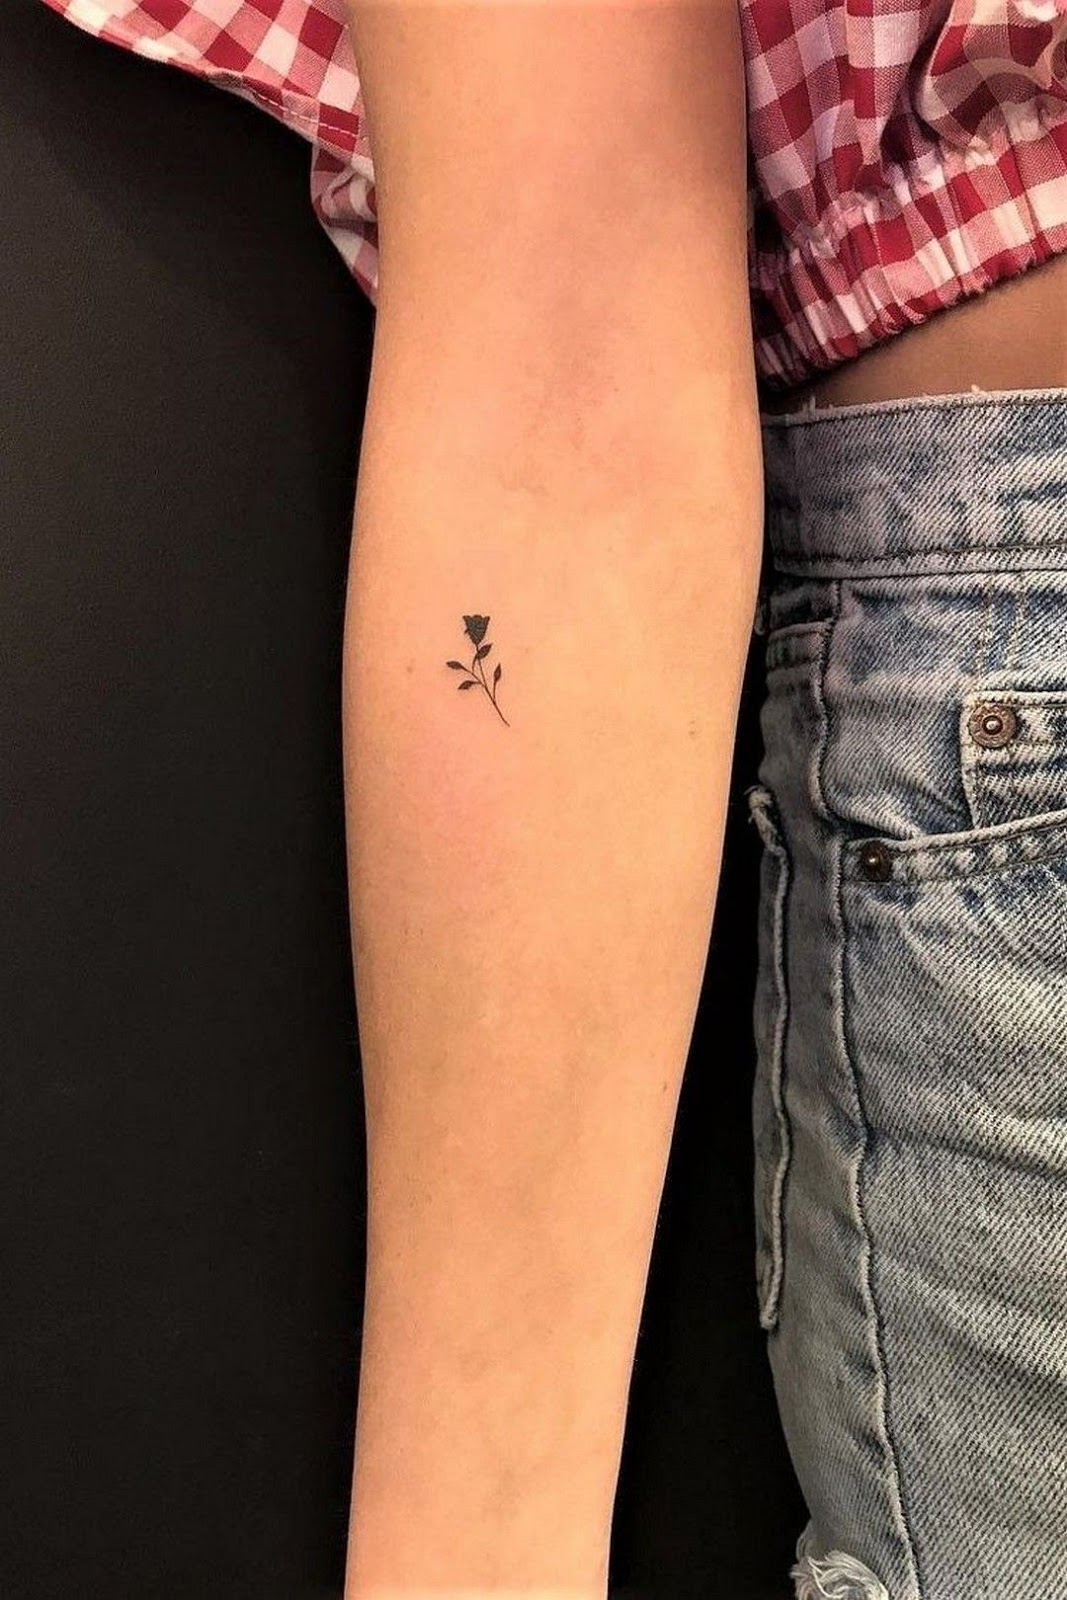 Disney Tattoo Designs Small Simple Pictures (37)